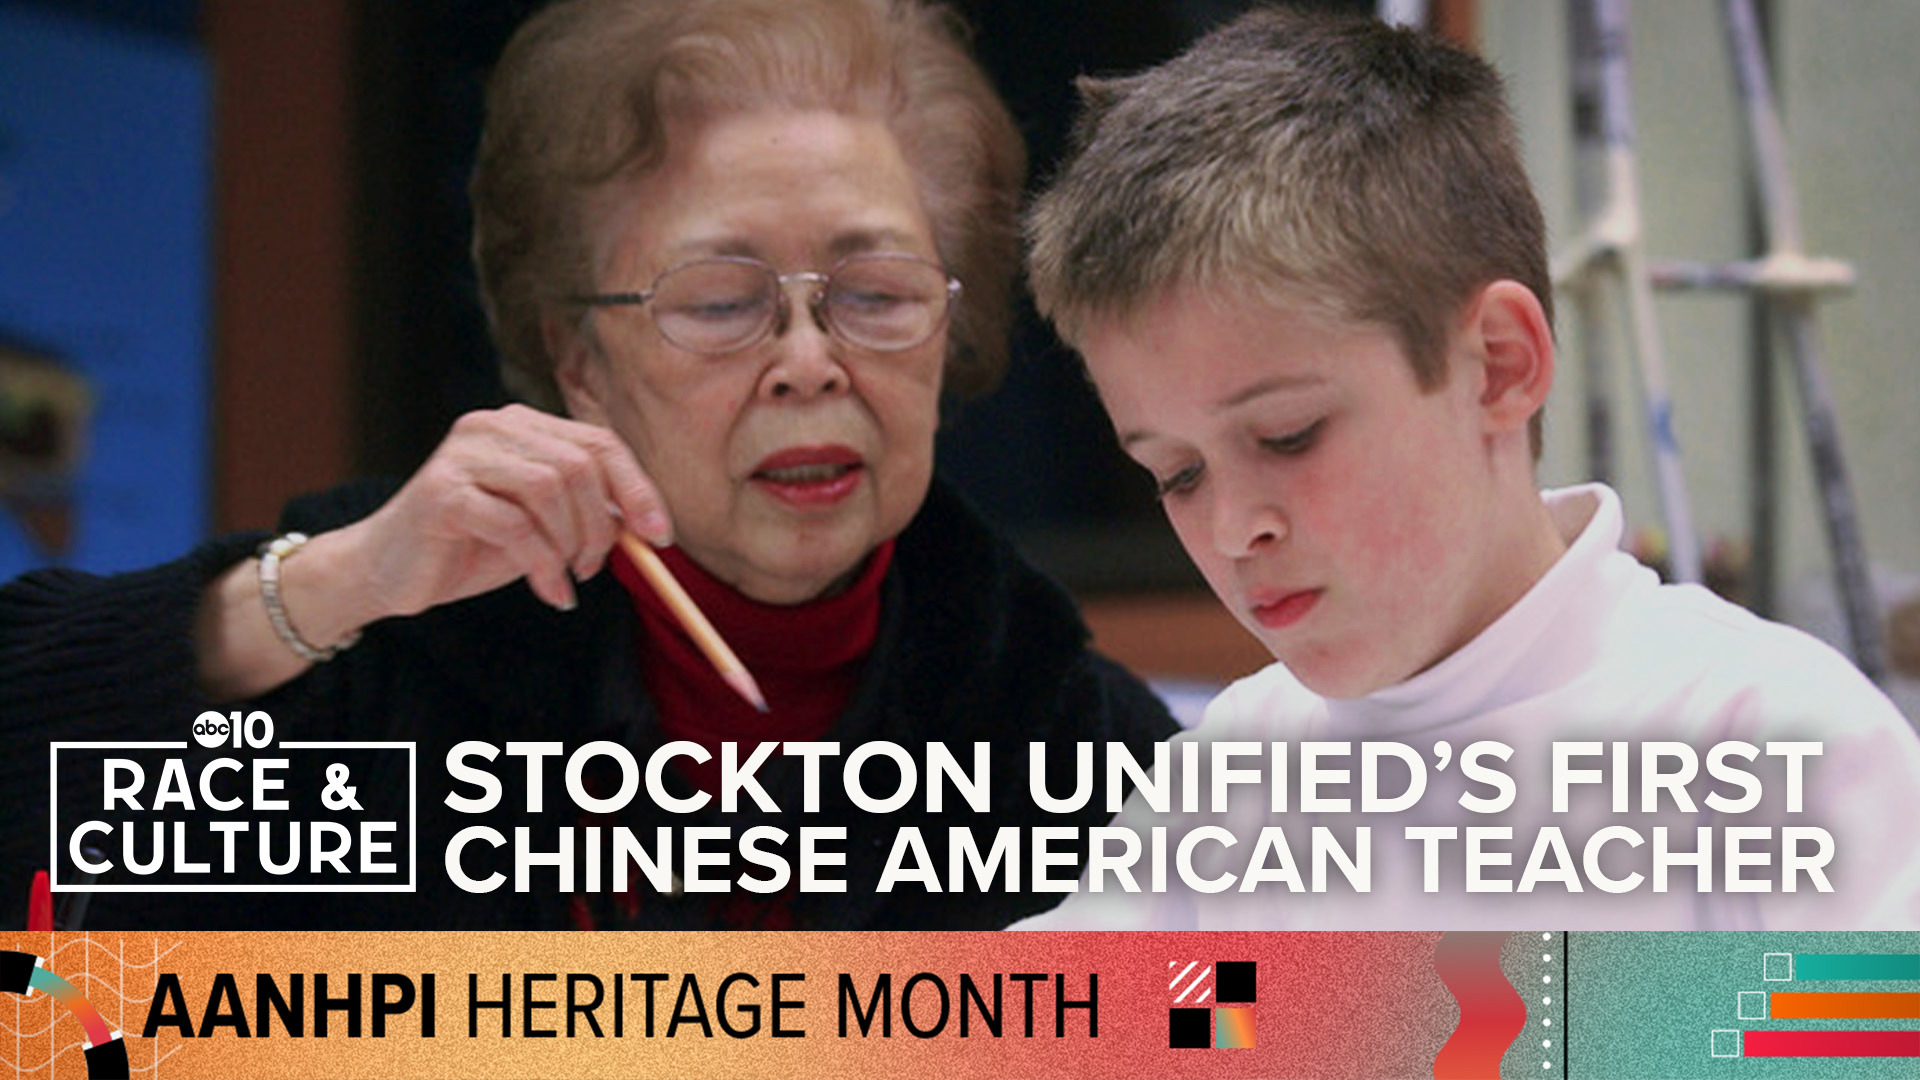 Esther Fong taught students at Washington, Madison, and Hoover Elementary in Stockton. She retired in 1983.